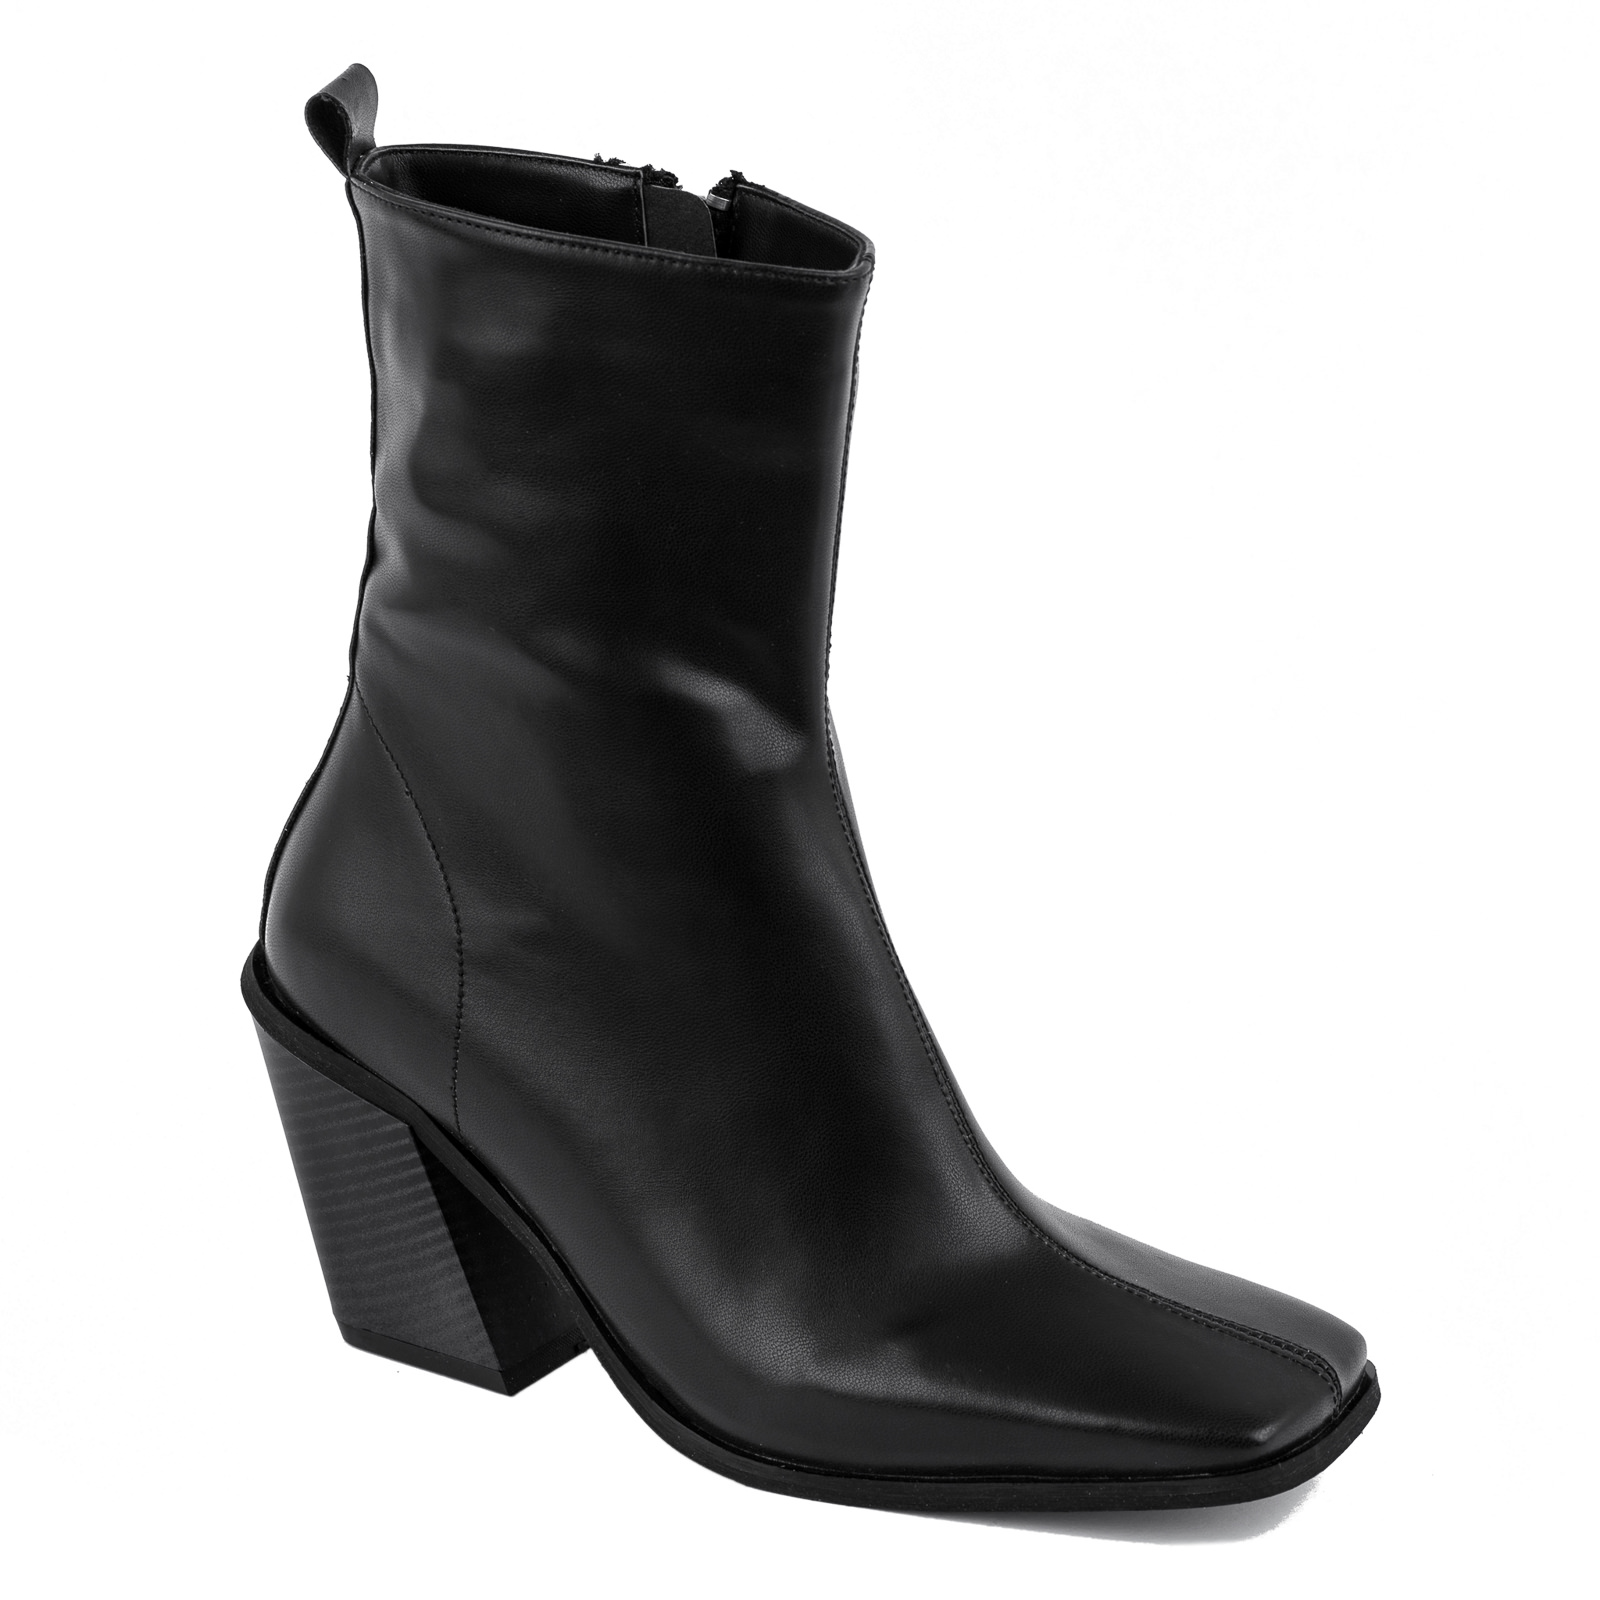 POINTED ANKLE BOOTS WITH BLOCK HEEL - BLACK